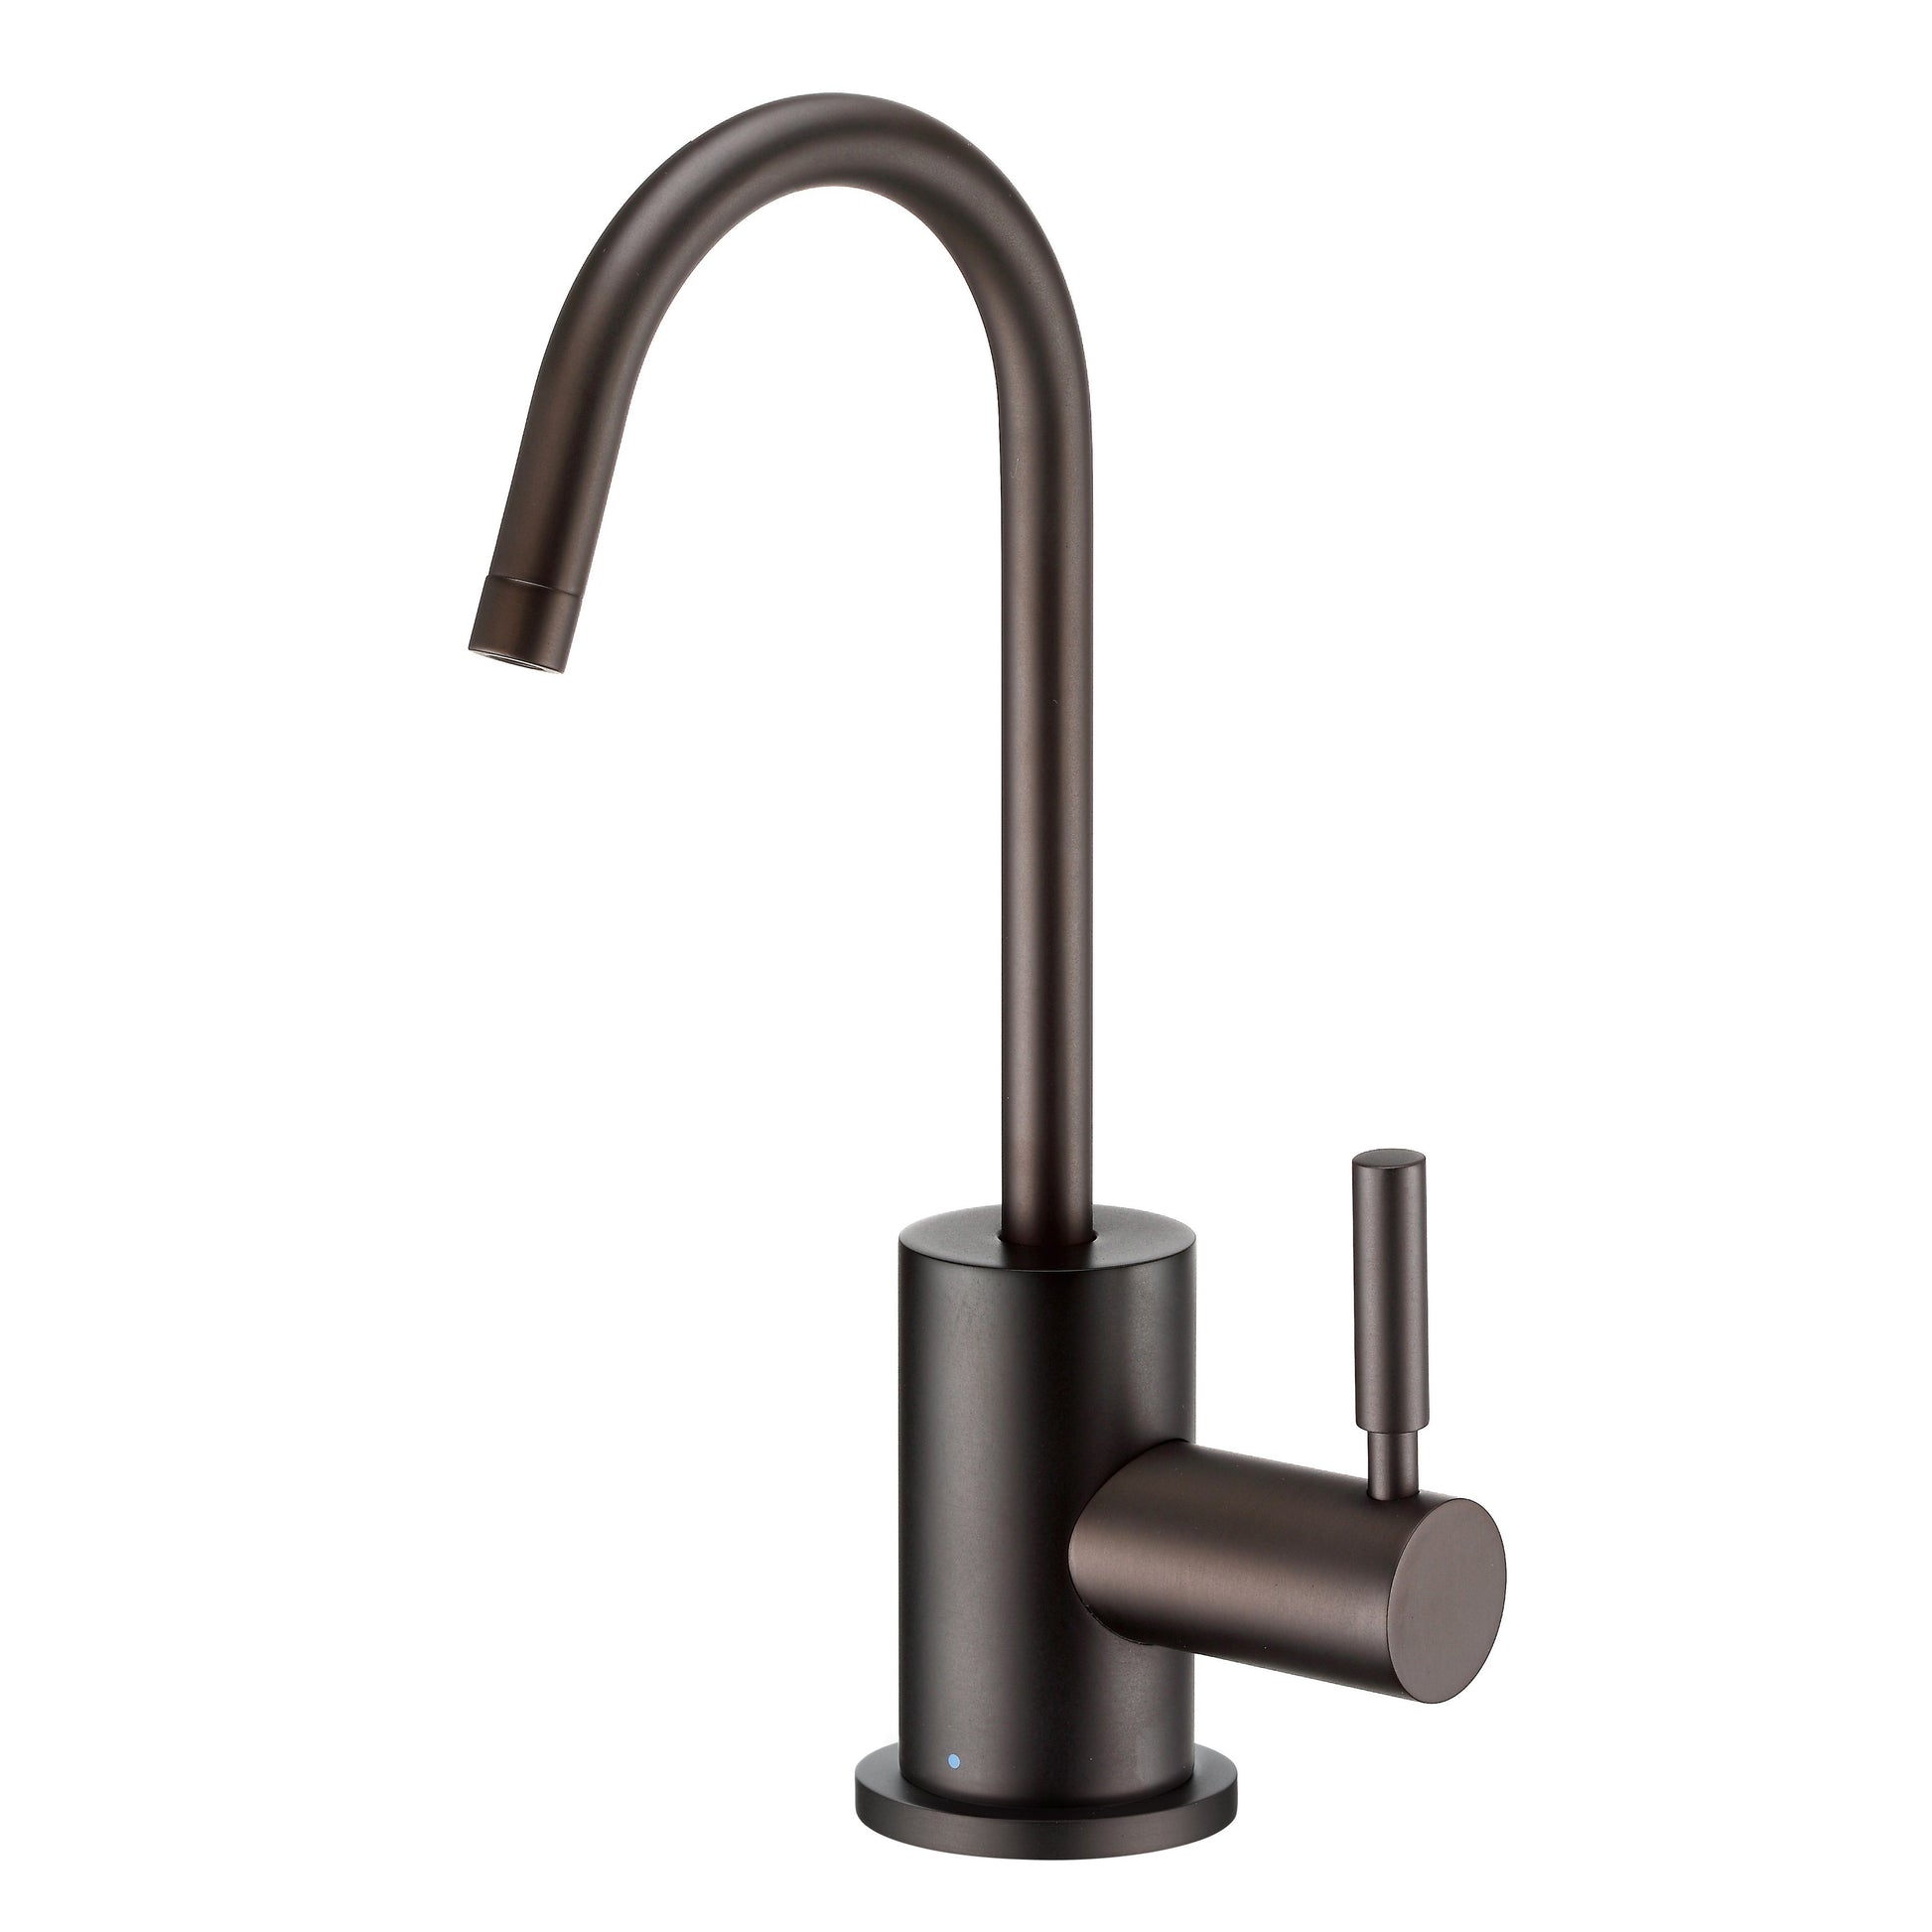 Whitehaus WHFH-C1010-ORB Point of Use Cold Water Drinking Faucet with Gooseneck Swivel Spout